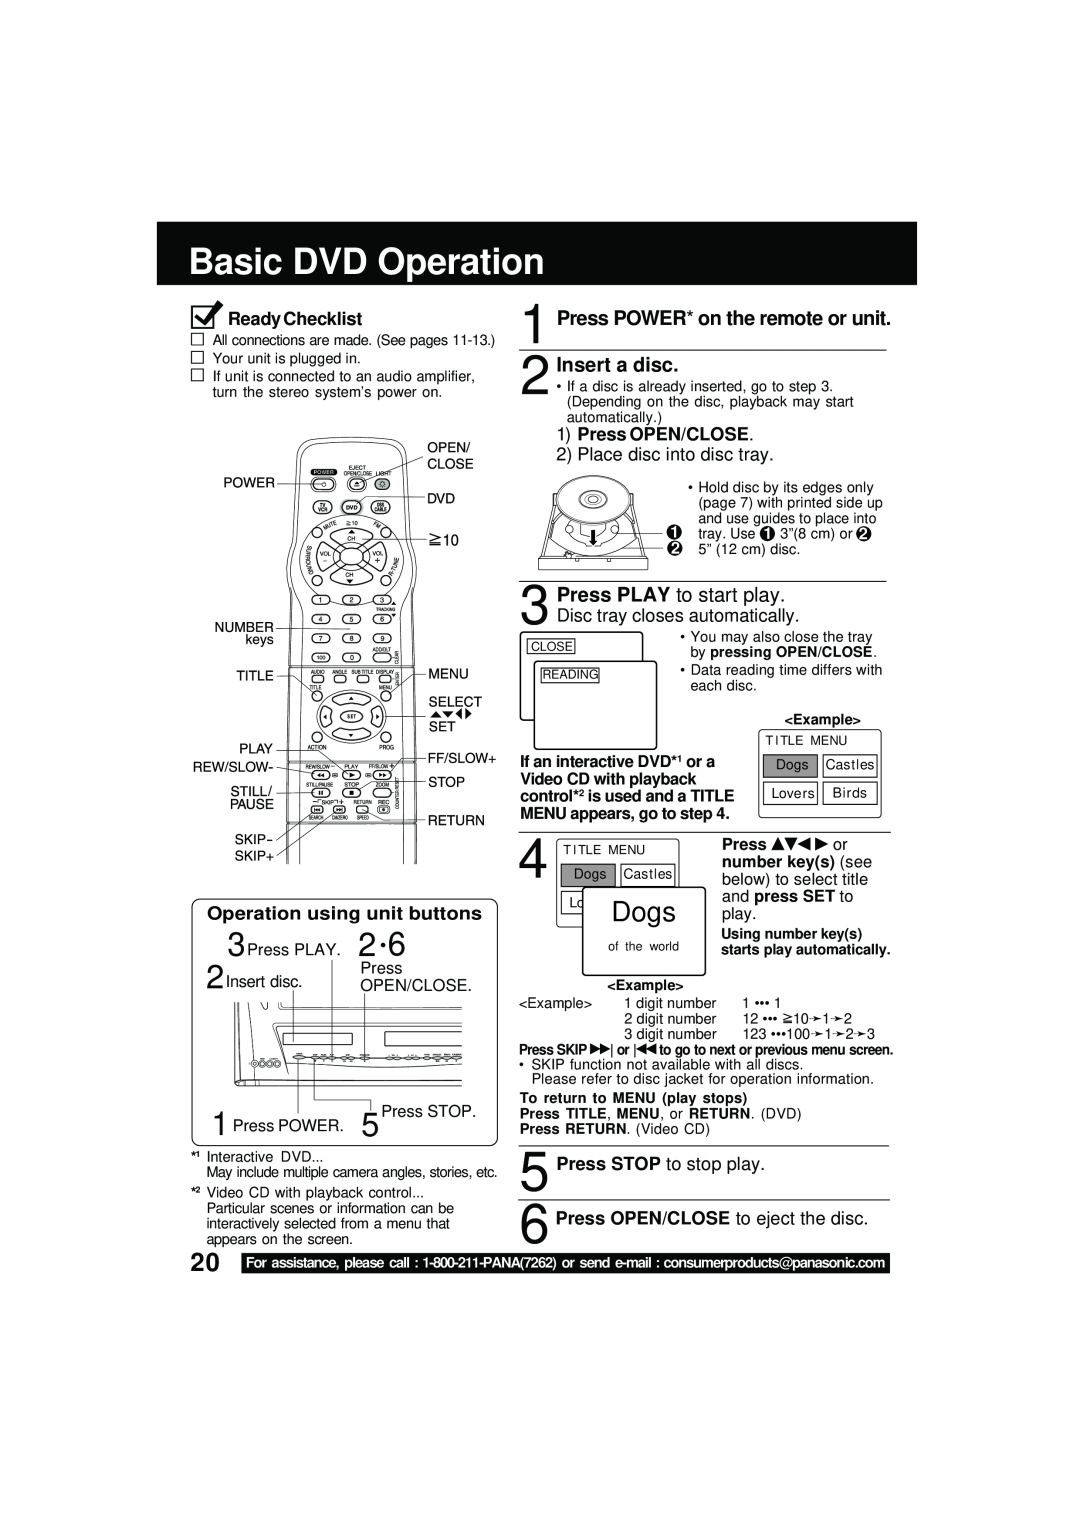 Panasonic PV DM2092 Basic DVD Operation, Press POWER* on the remote or unit Insert a disc, Press OPEN/CLOSE, Dogs, Example 